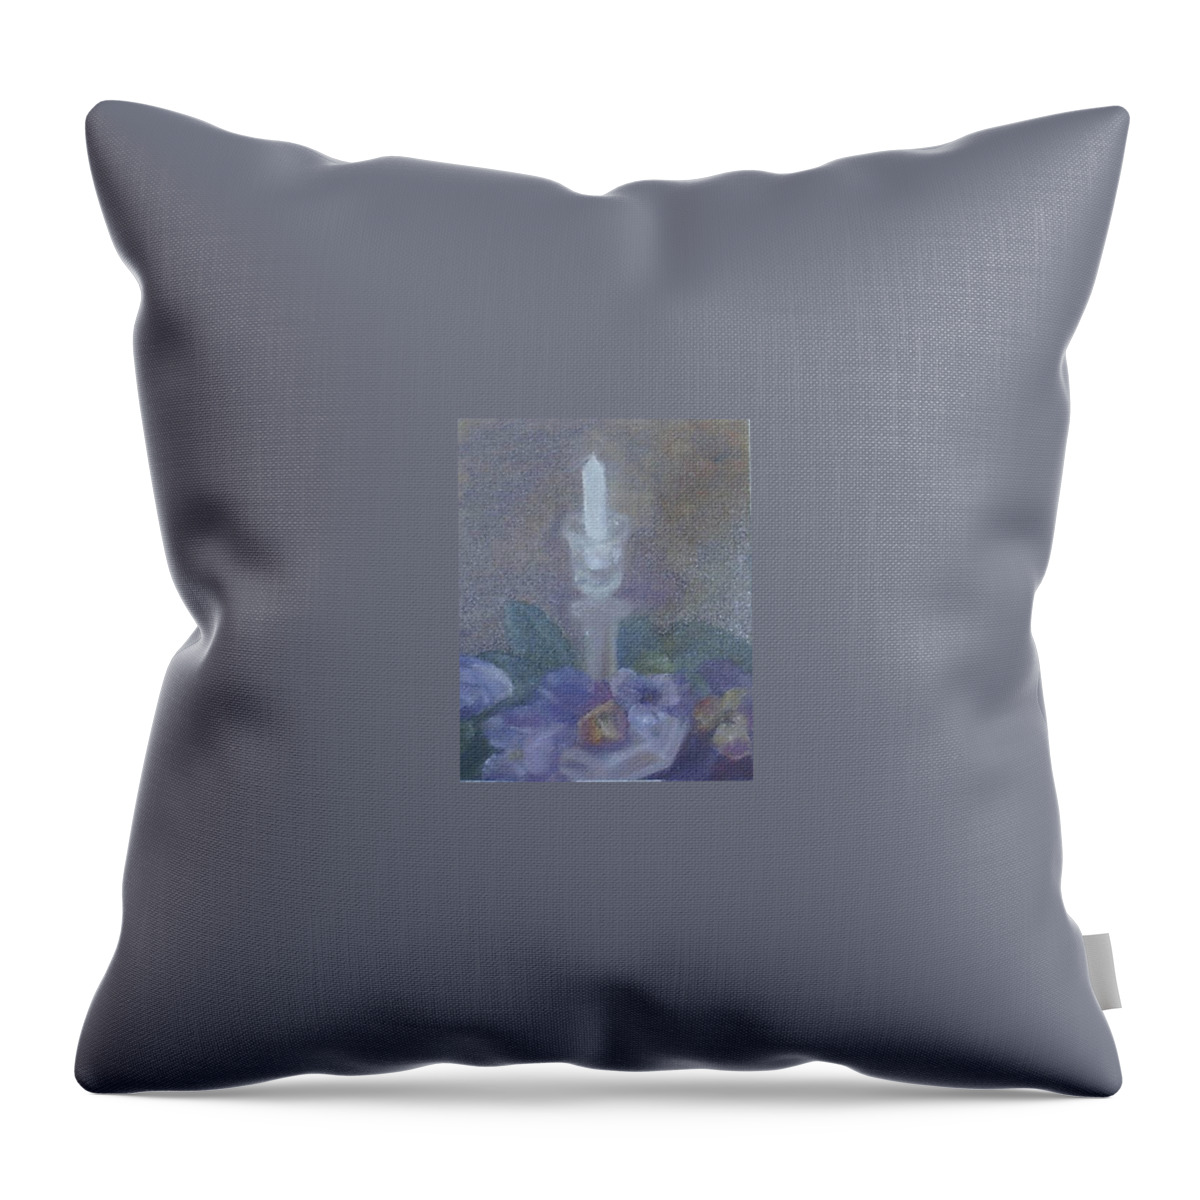 Candle Throw Pillow featuring the painting Candle by Sheila Mashaw